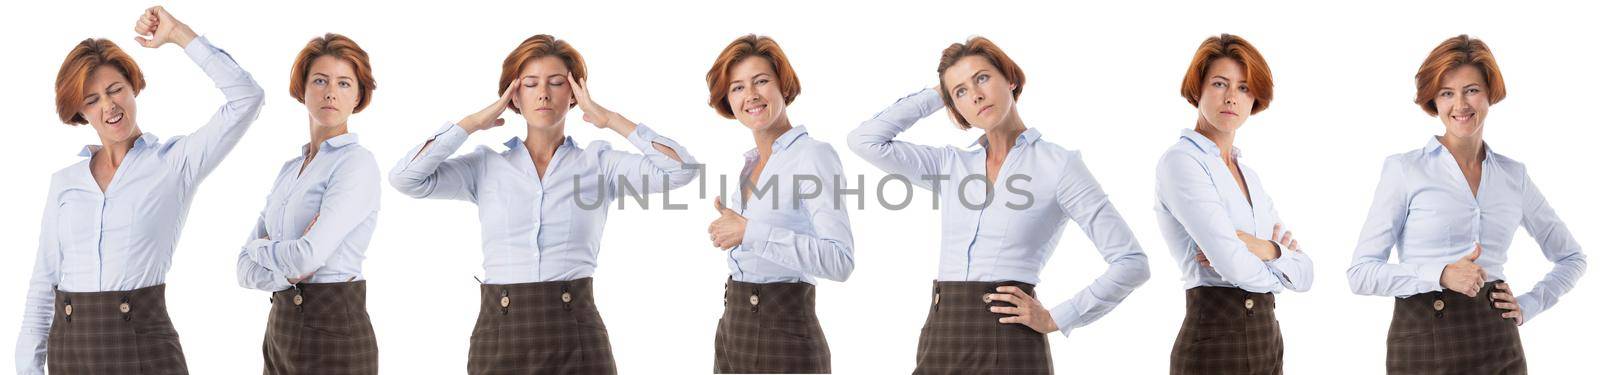 Set collection of portraits of one beautiful business woman showing different emotions isolated on white background